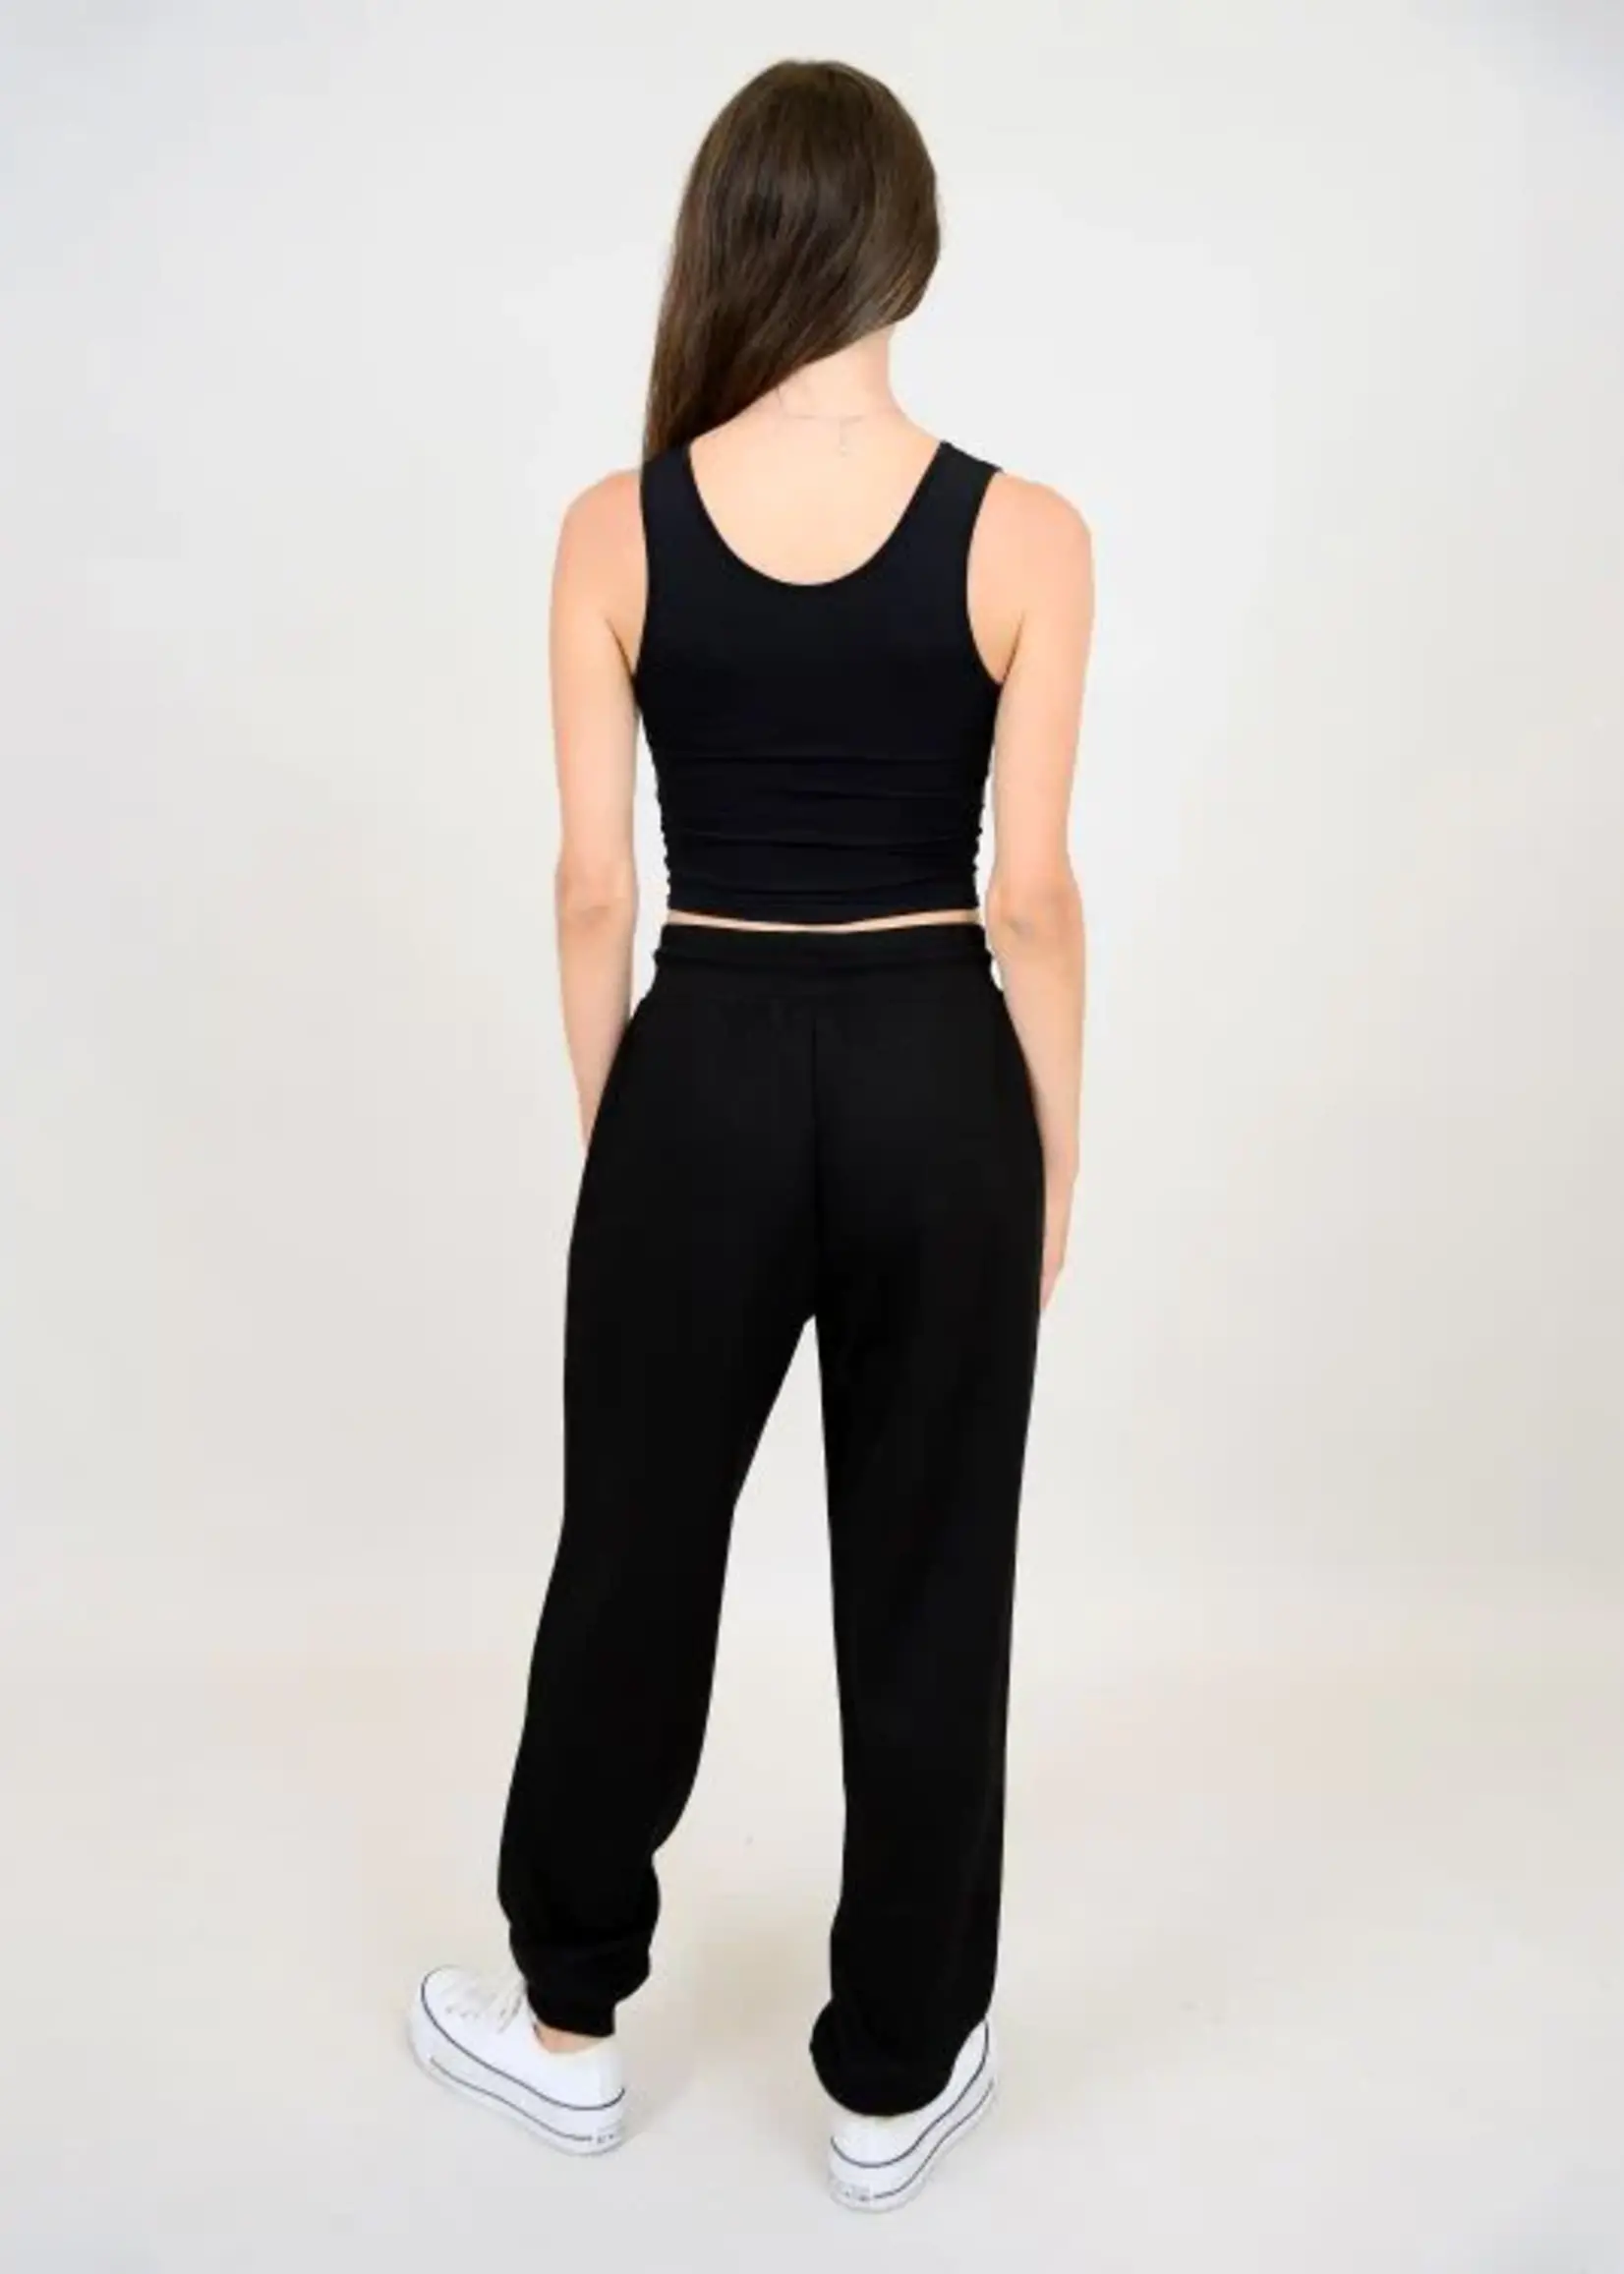 RD STYLE Joselle Soft Knit Jogger